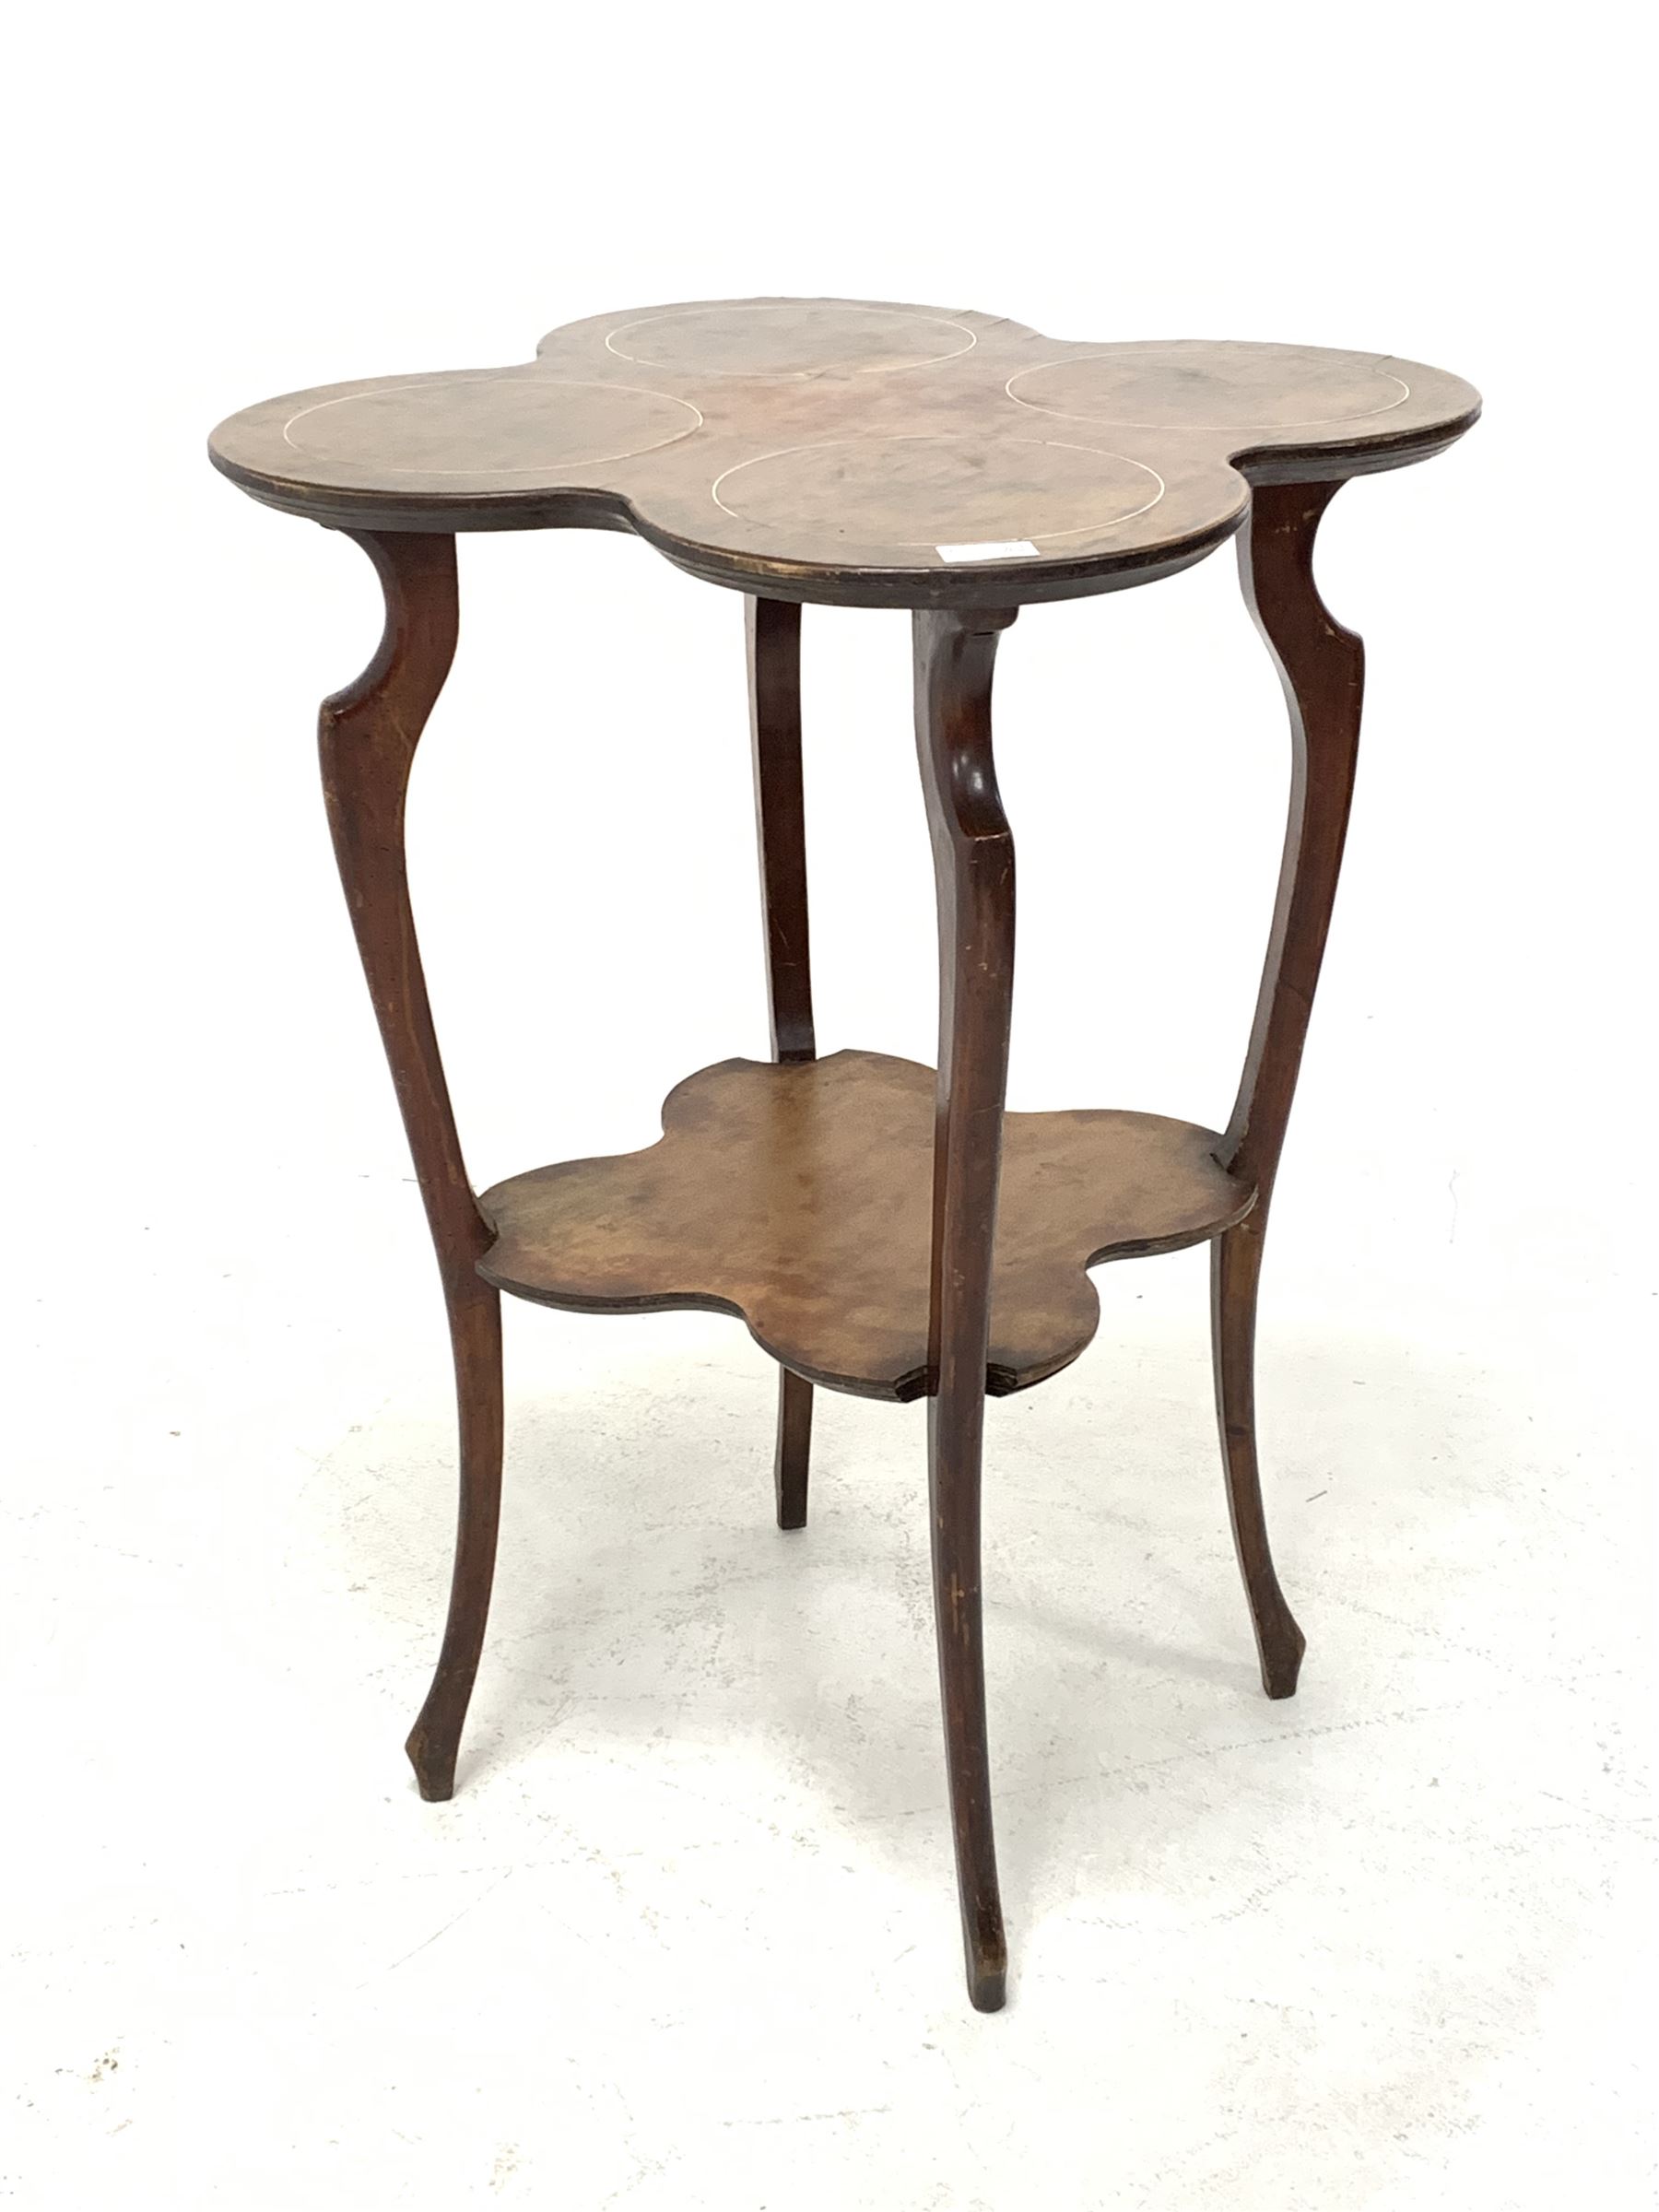 Early 20th century walnut occasional table - Image 2 of 2